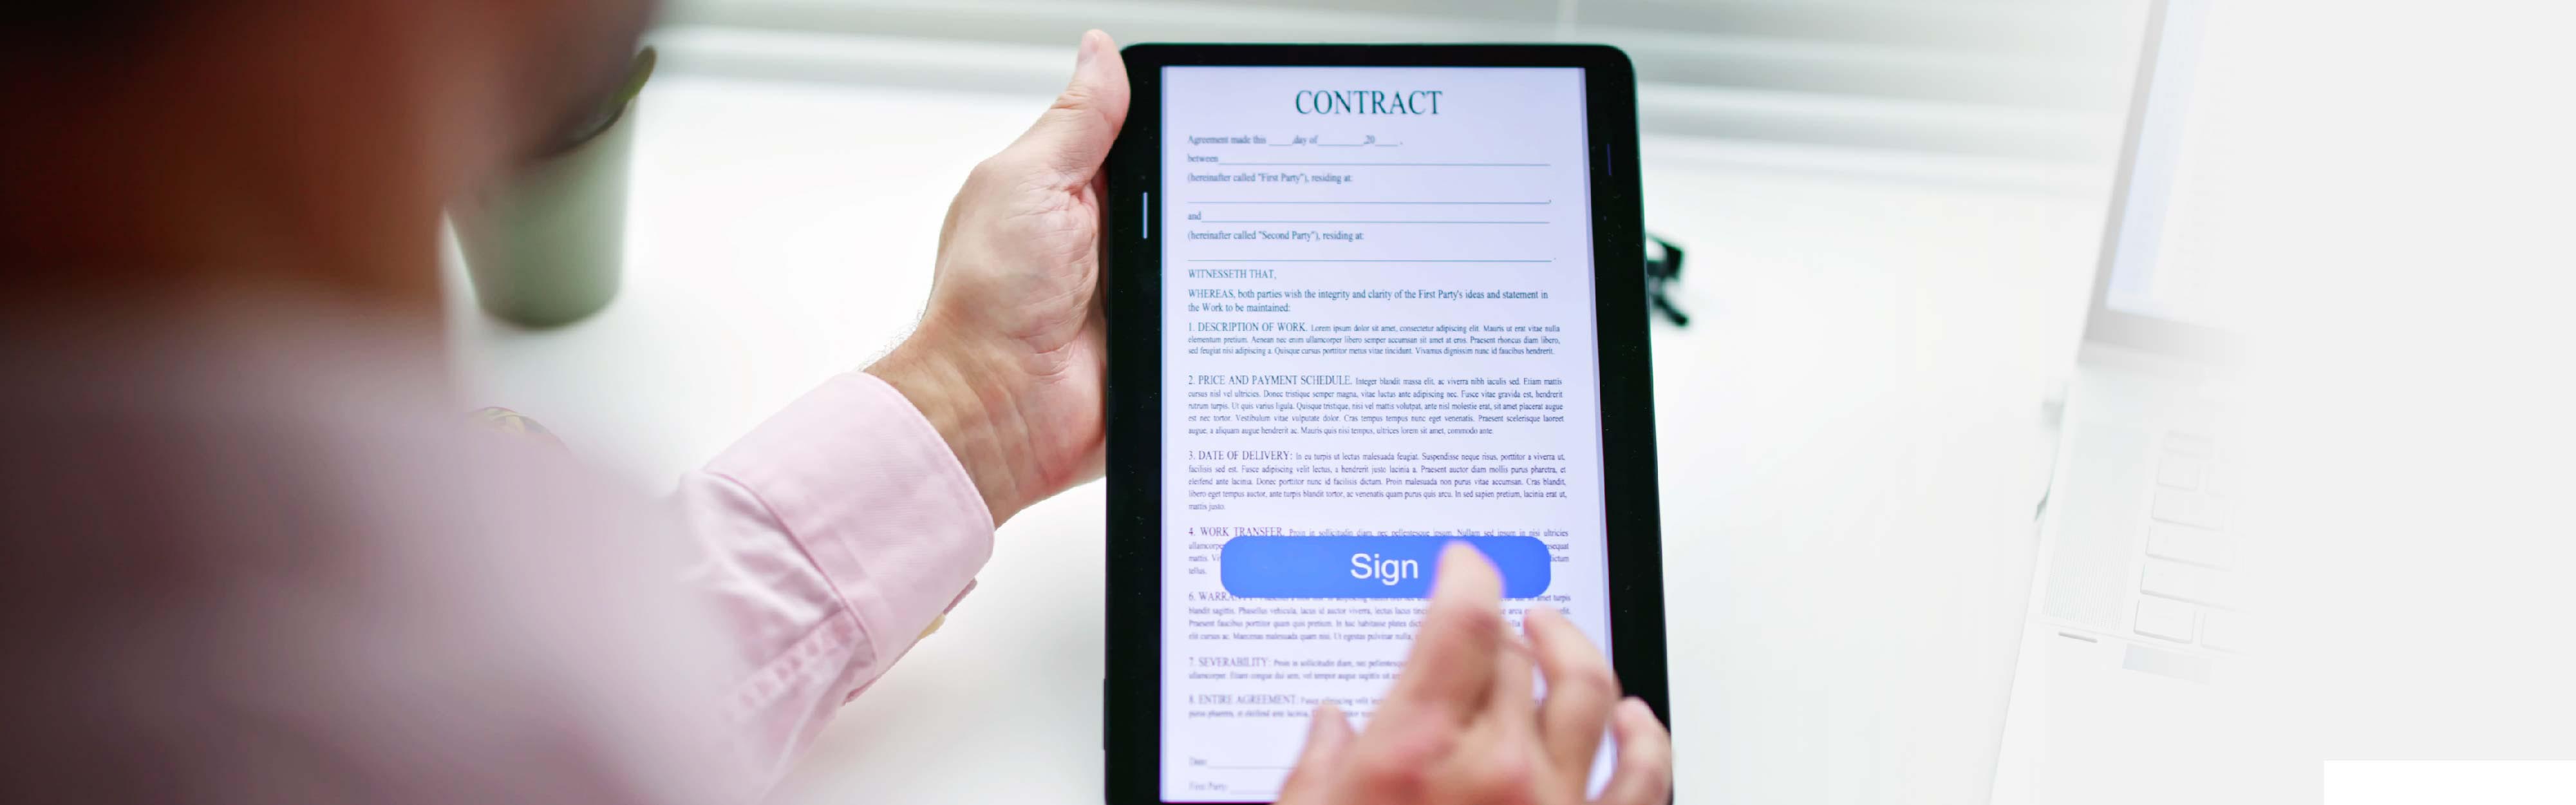 Keep Online Contracts Legally Binding with eSignatures